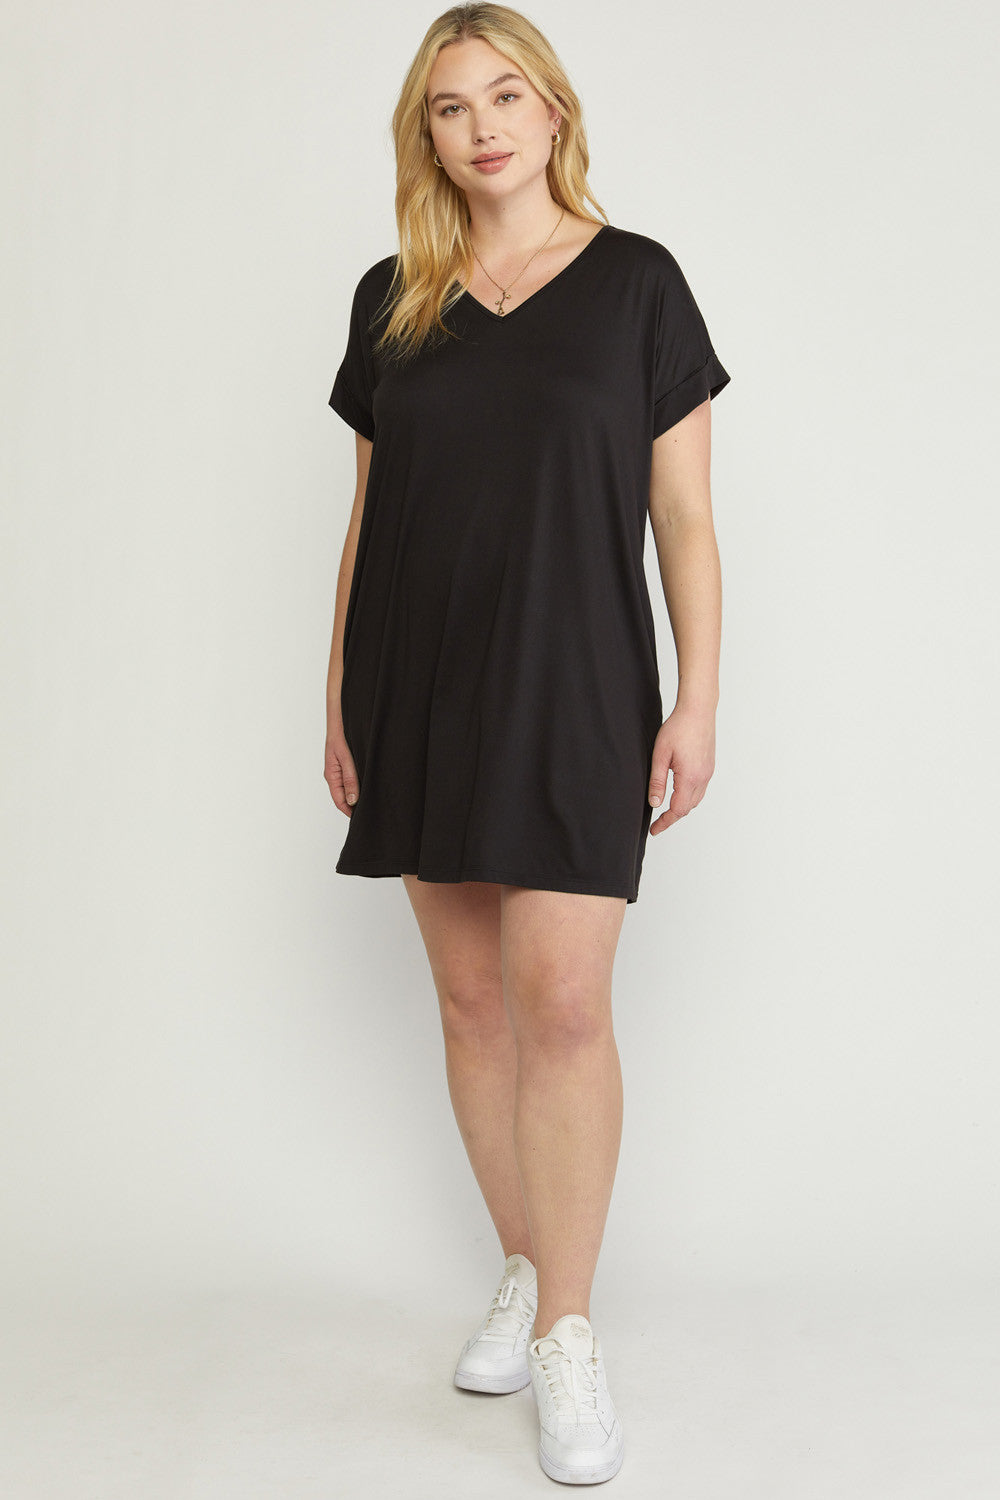 Cuffed Sleeve V-Neck T-Shirt Dress with Pockets in Plus Size by Entro